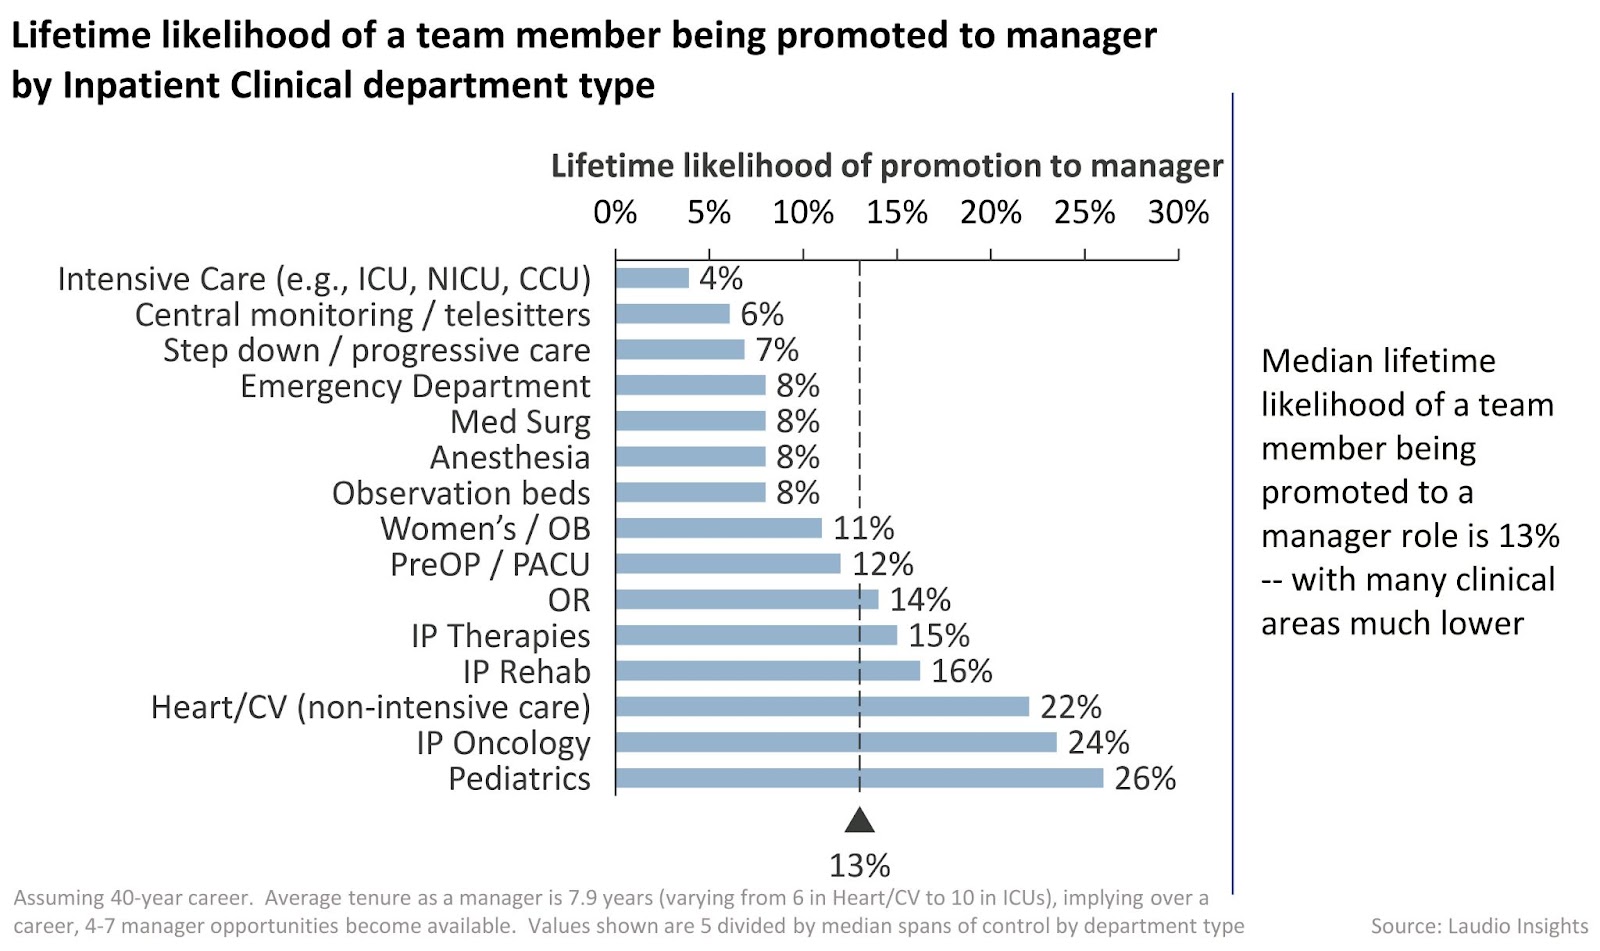 Laudio Insights - Lifetime likelihood of a team member being promoted to manager by Inpatient Clinical department type